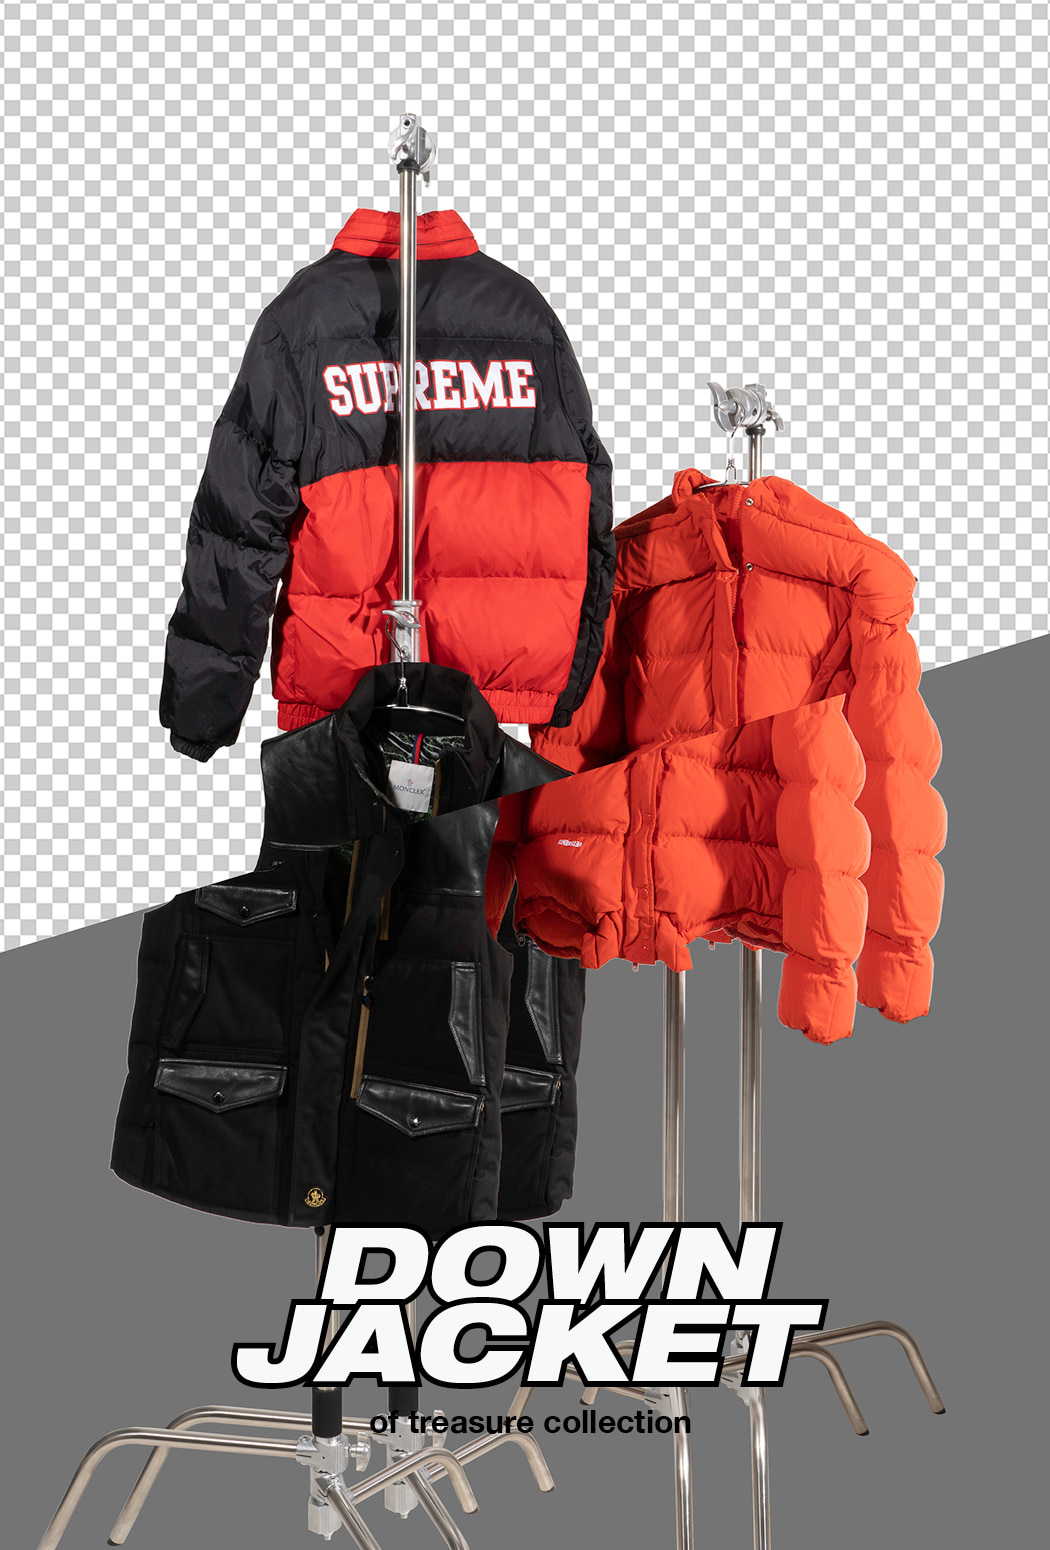 DOWN JACKET of treasure collection